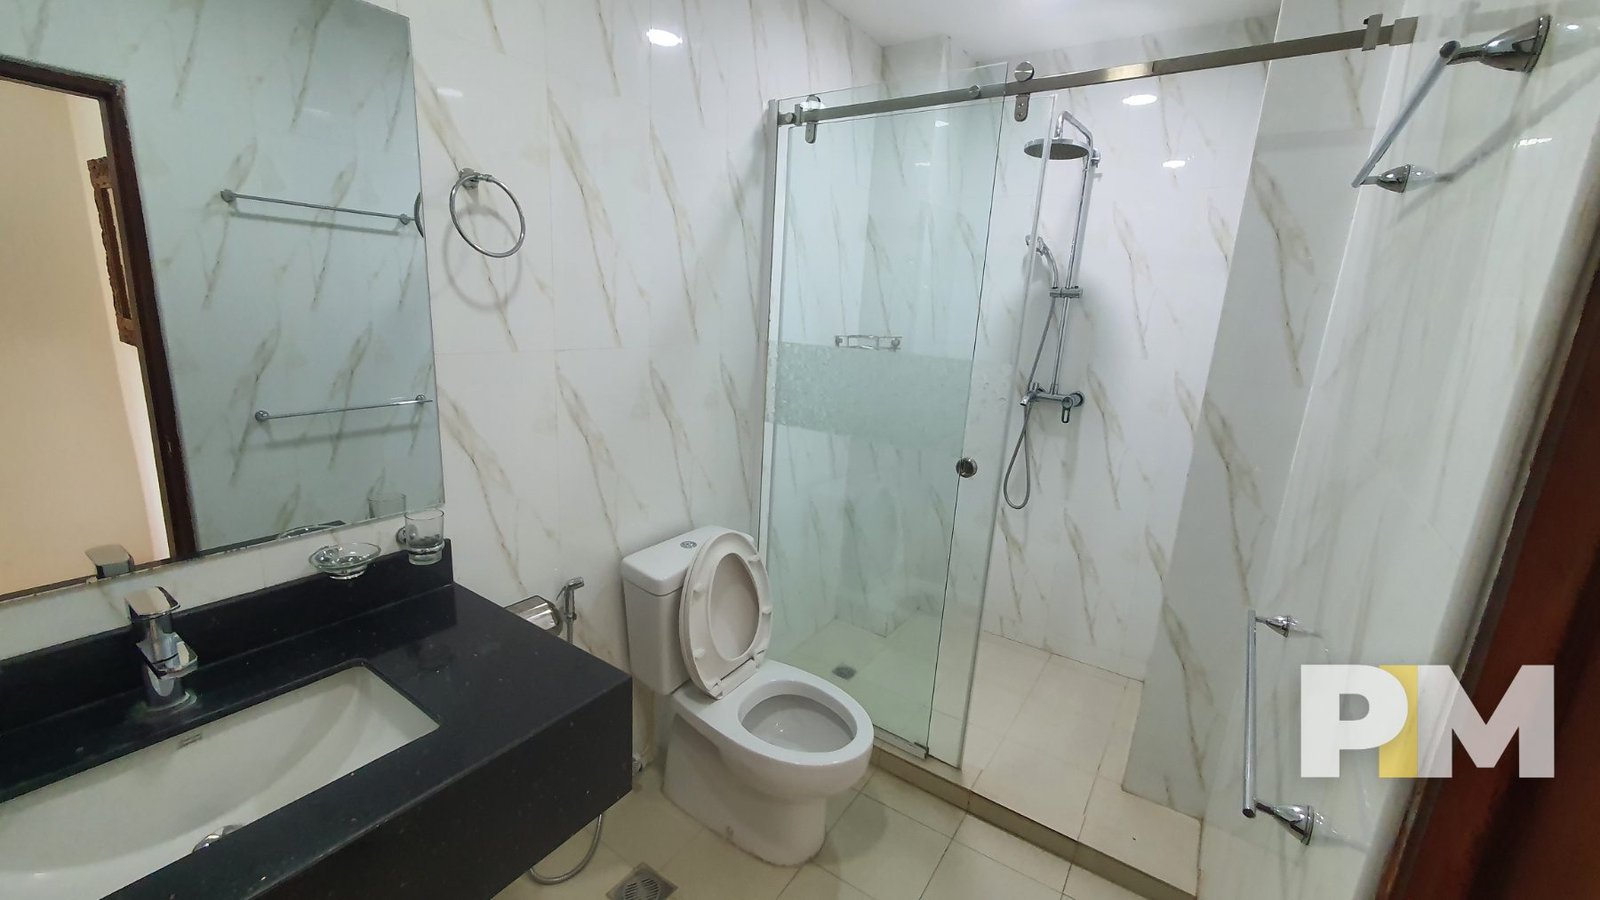 Bathroom in penthouse for rent in yangon